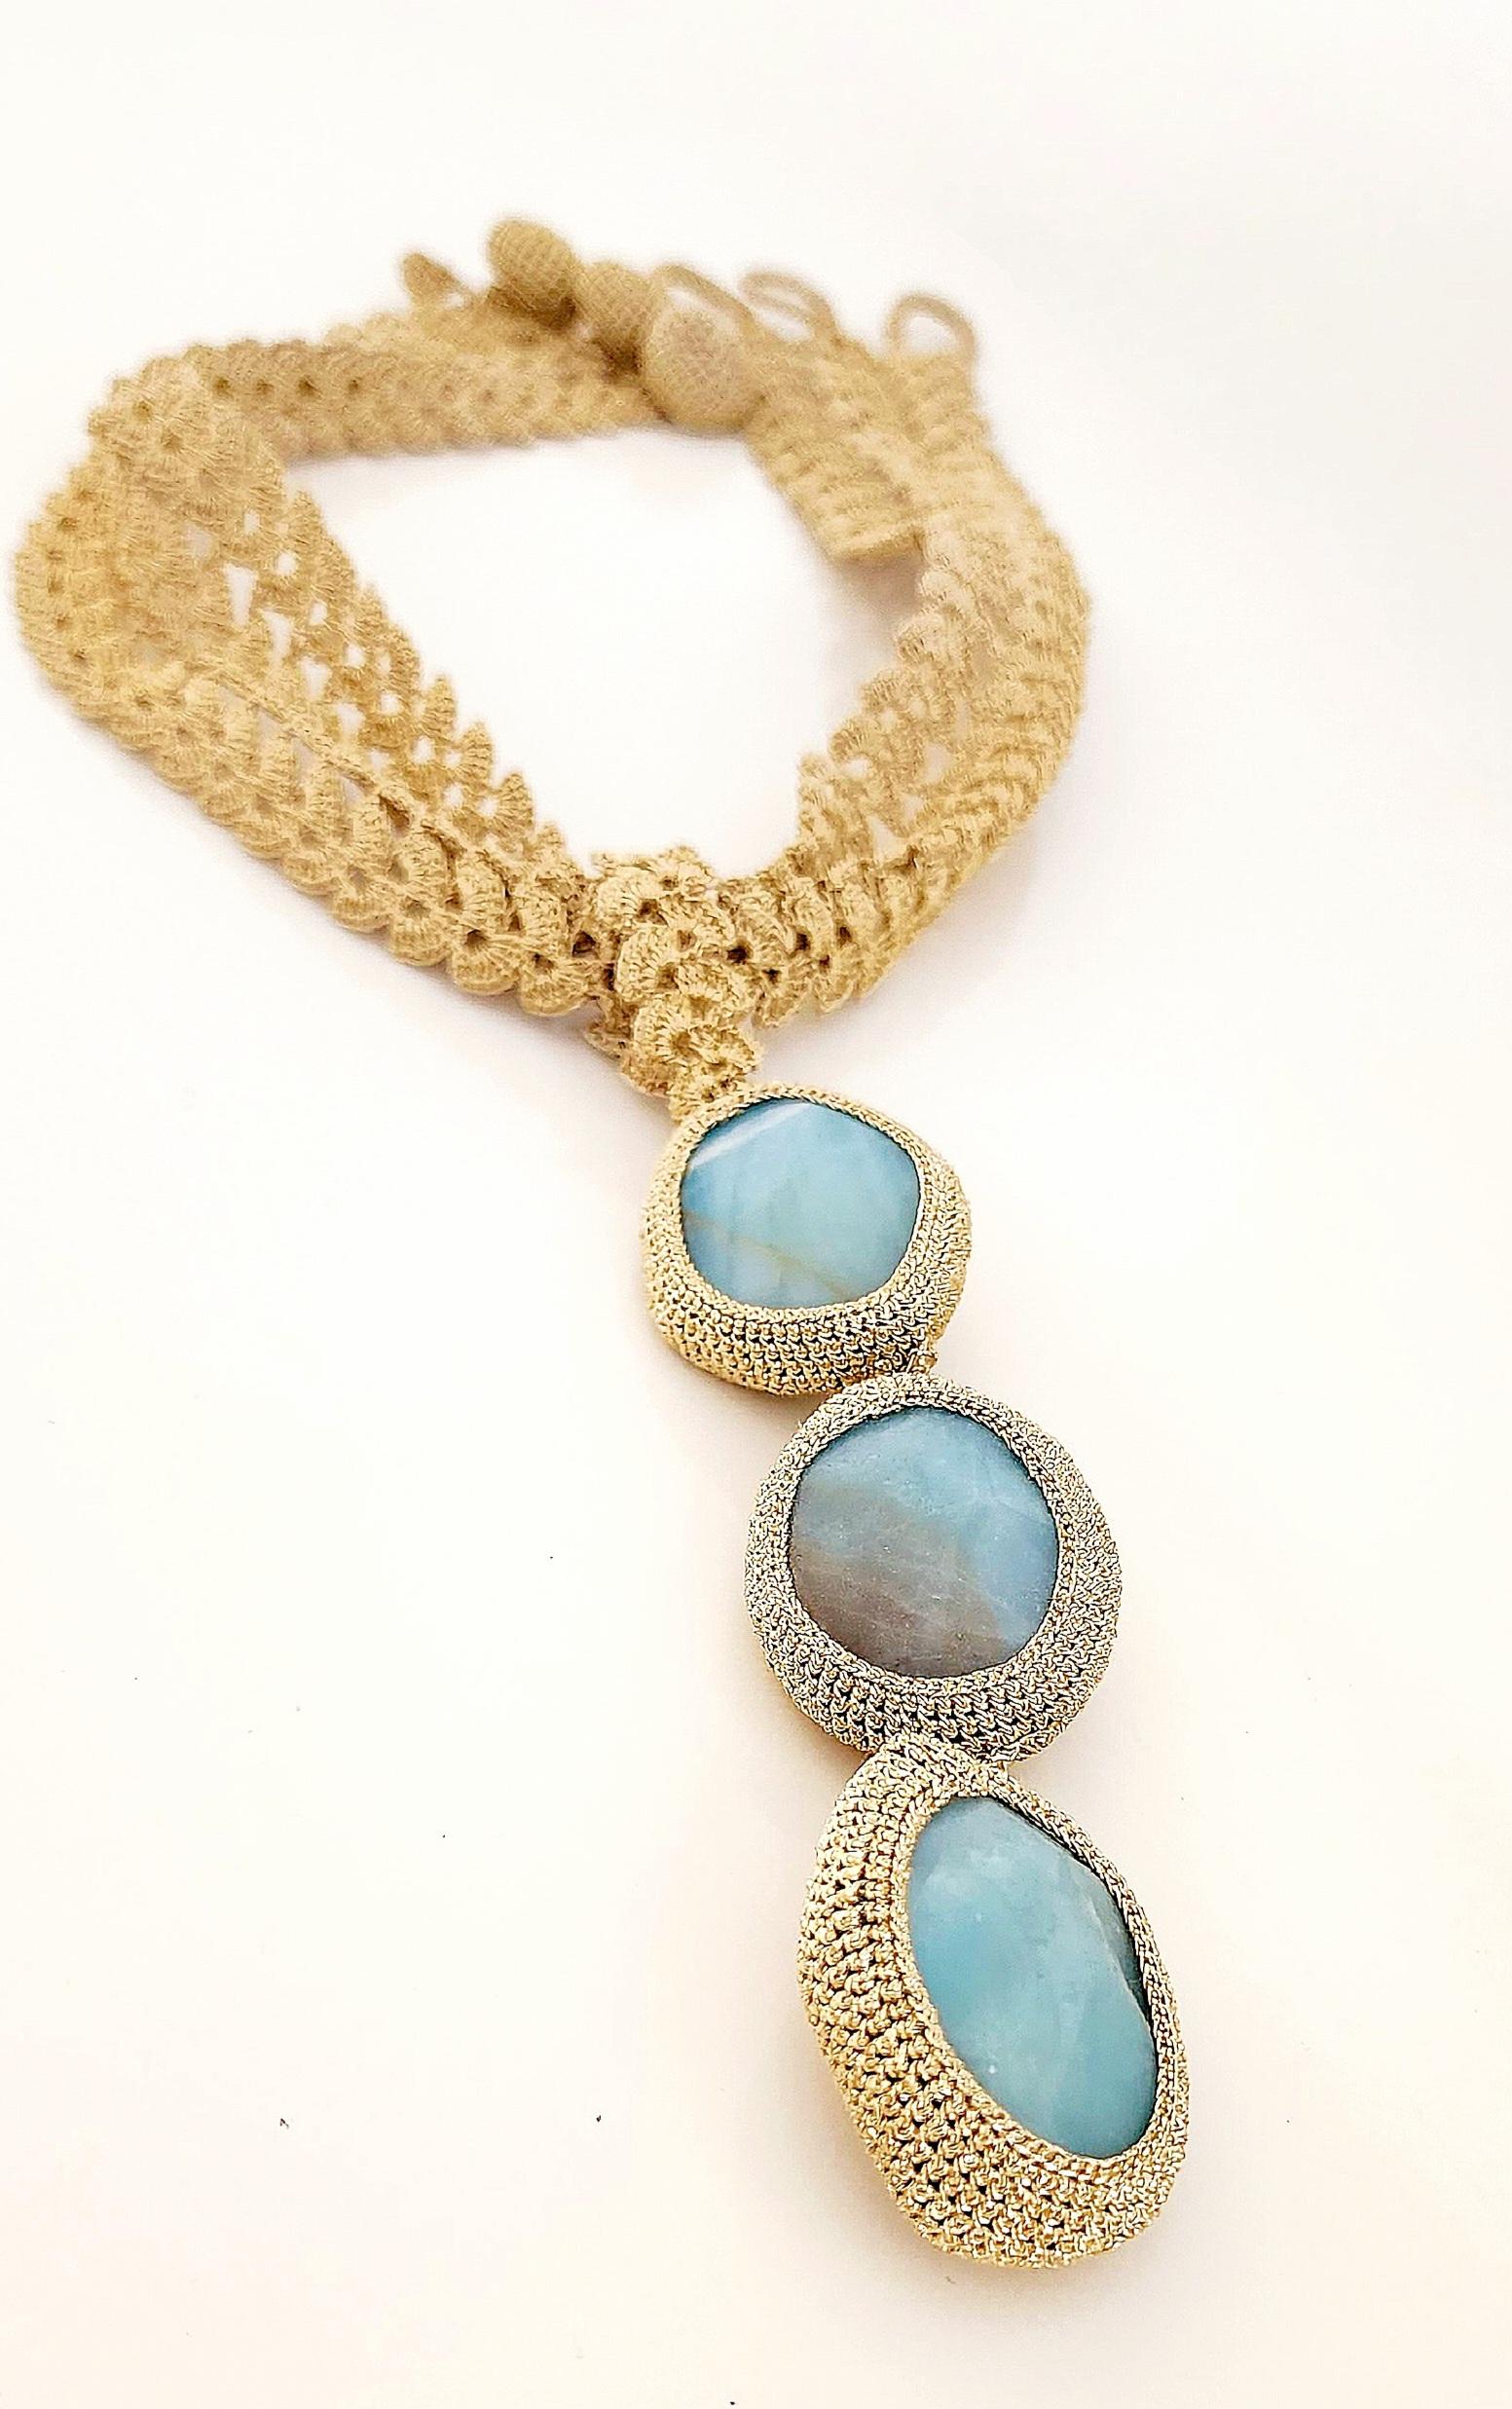 Artist Golden Thread Hand Crochet One of a Kind Scarf Necklace Amazonite For Sale